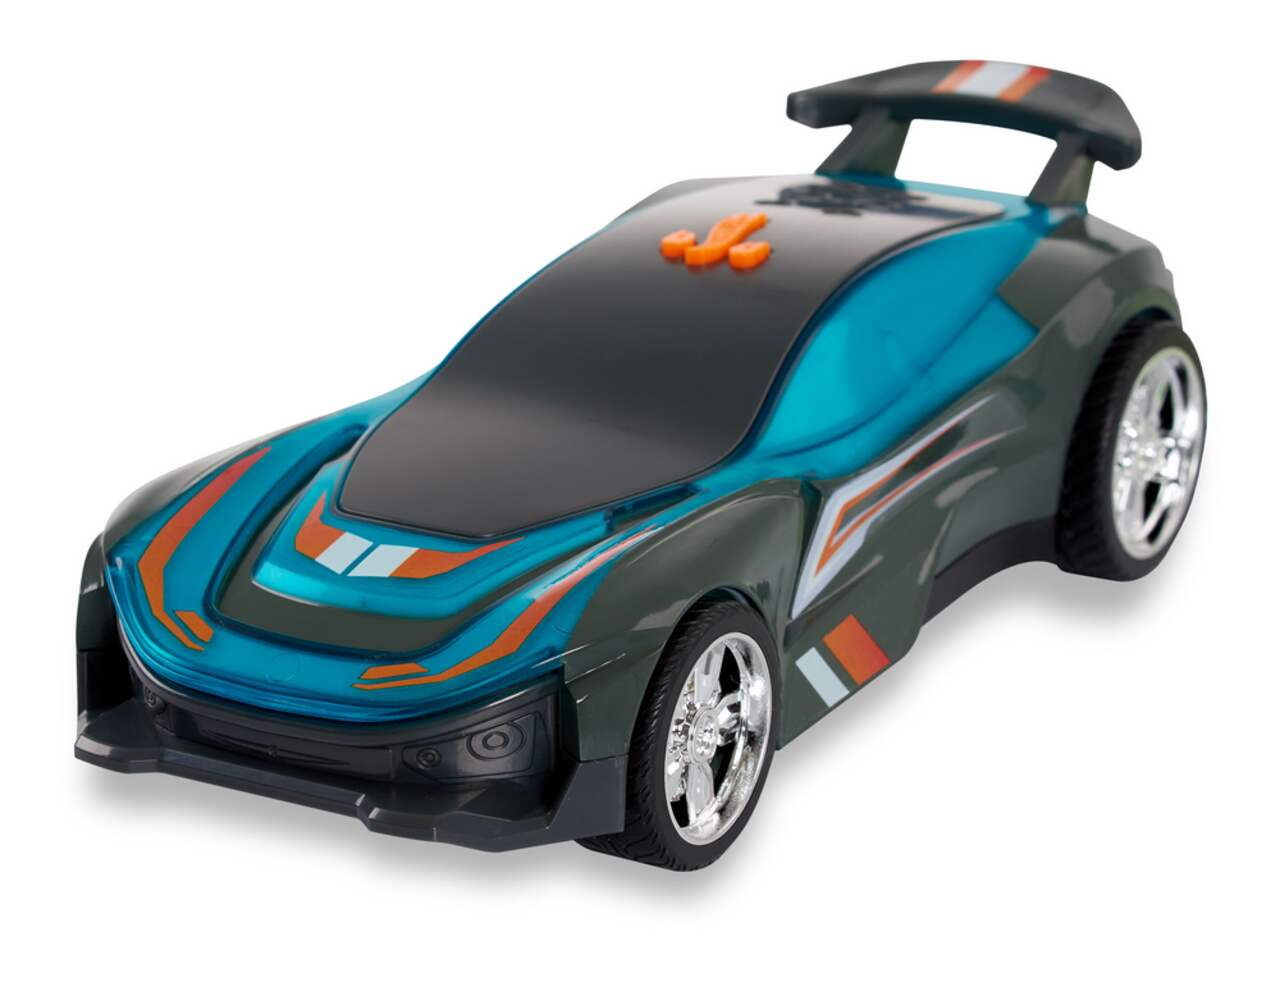 https://media-www.canadiantire.ca/product/seasonal-gardening/toys/toys-games/0508178/-hot-wheels-colour-crashers-assorted-bc244d2b-3fab-4c42-a53d-702b57e94985.png?imdensity=1&imwidth=640&impolicy=mZoom